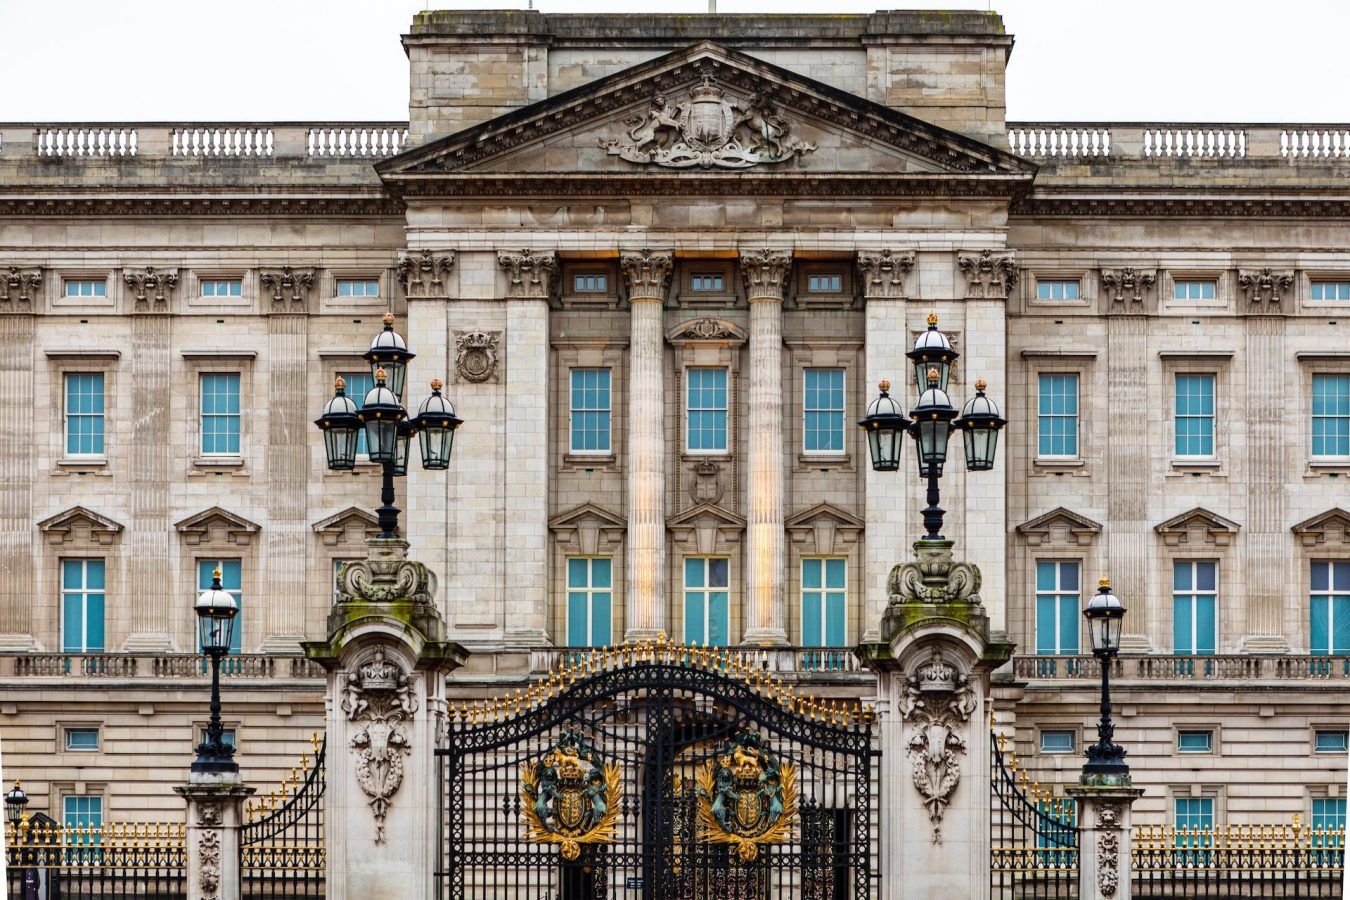 Buckingham Palace and other stunning royal residences from around the world